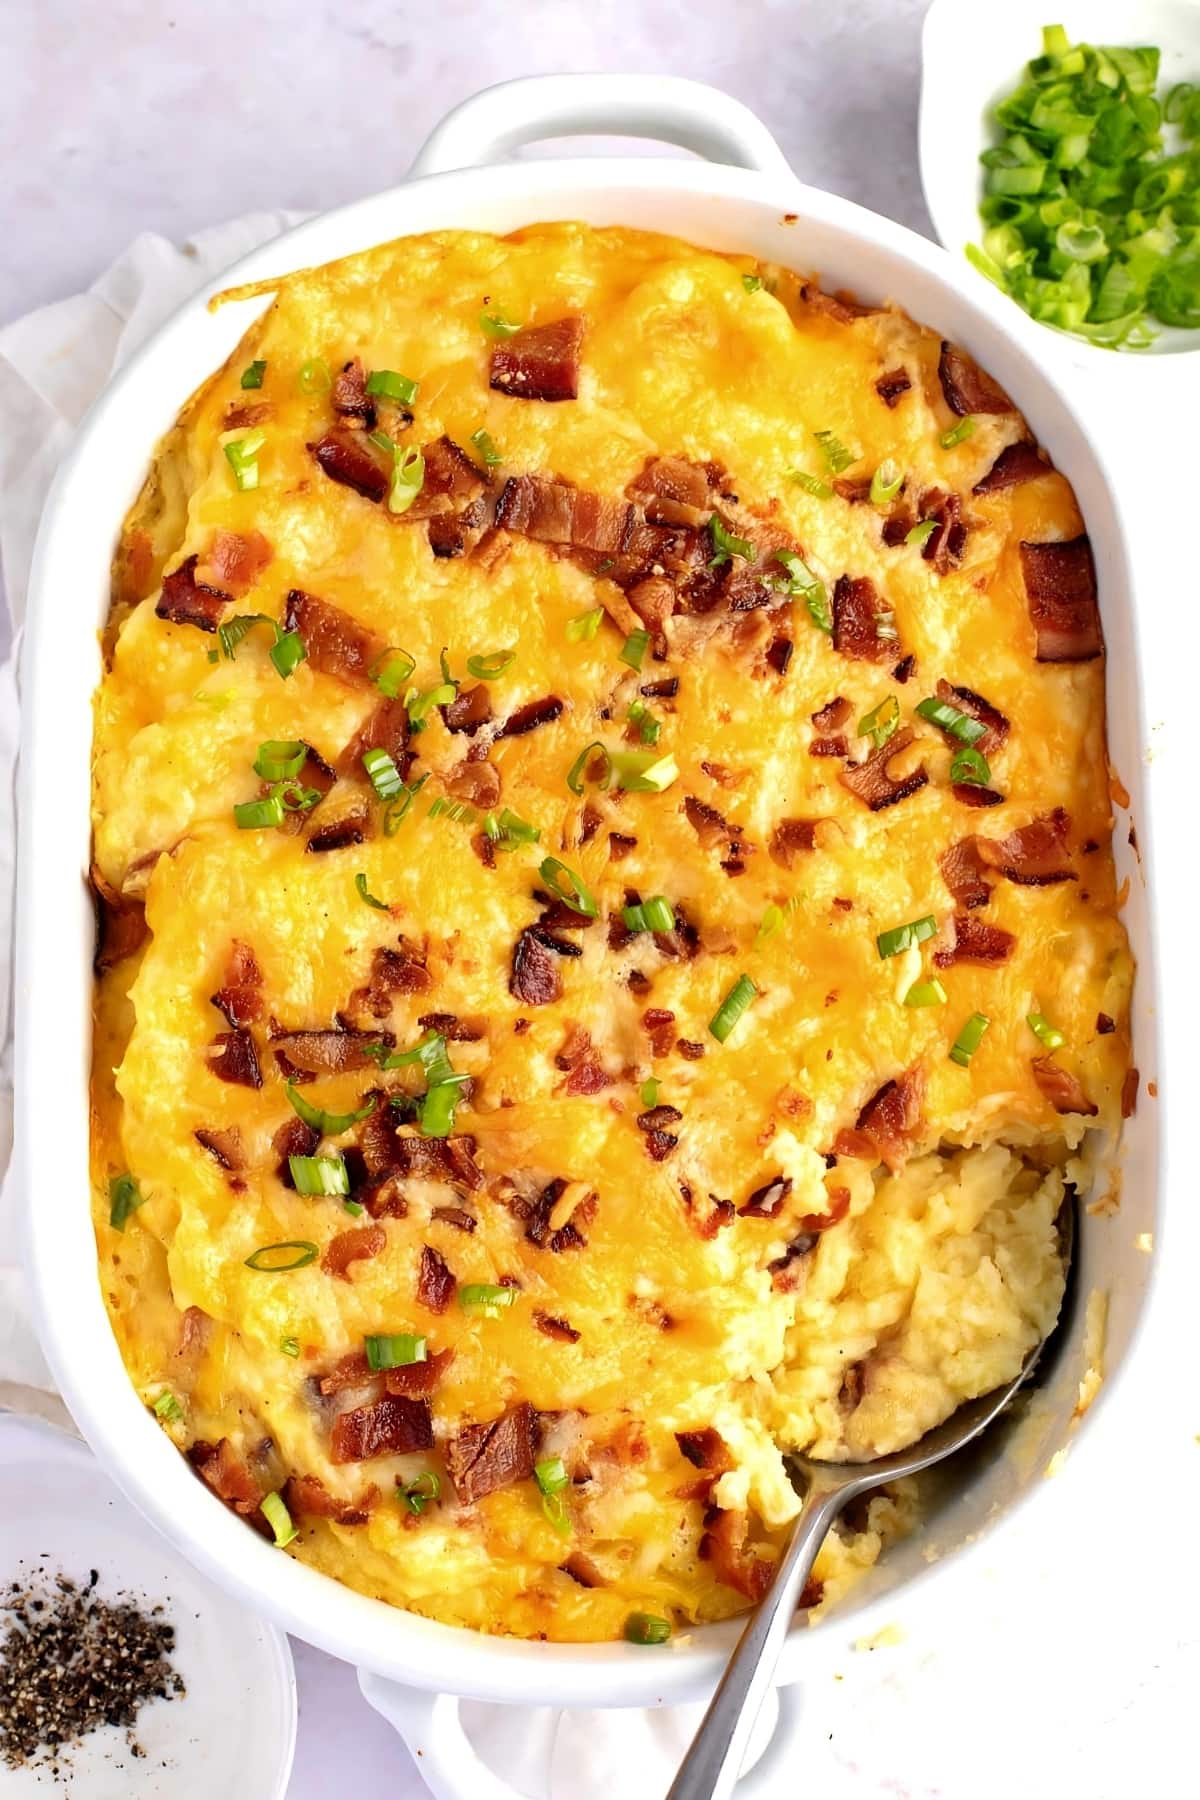 Homemade Loaded Mashed Potatoes with Green Onions, Bacon and Melted Cheese